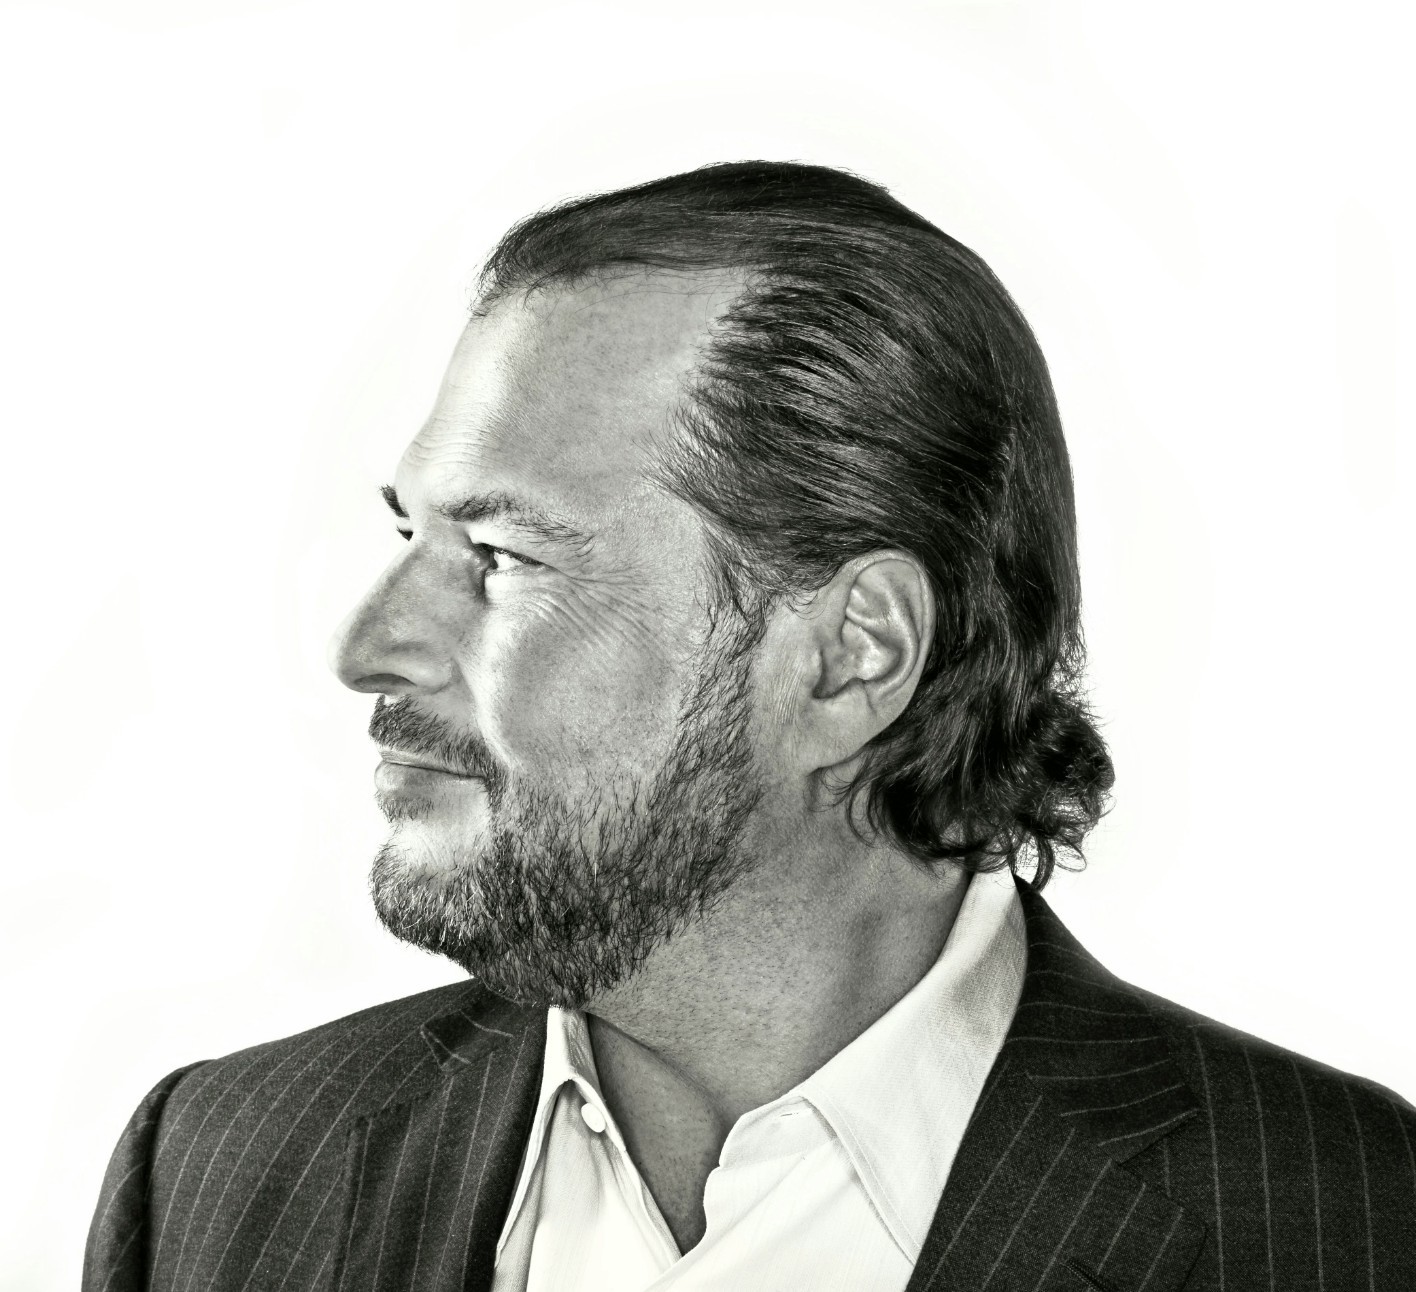 Marc Benioff is Chair, Chief Executive Officer and Co-Founder of Salesforce and a pioneer of cloud computing.